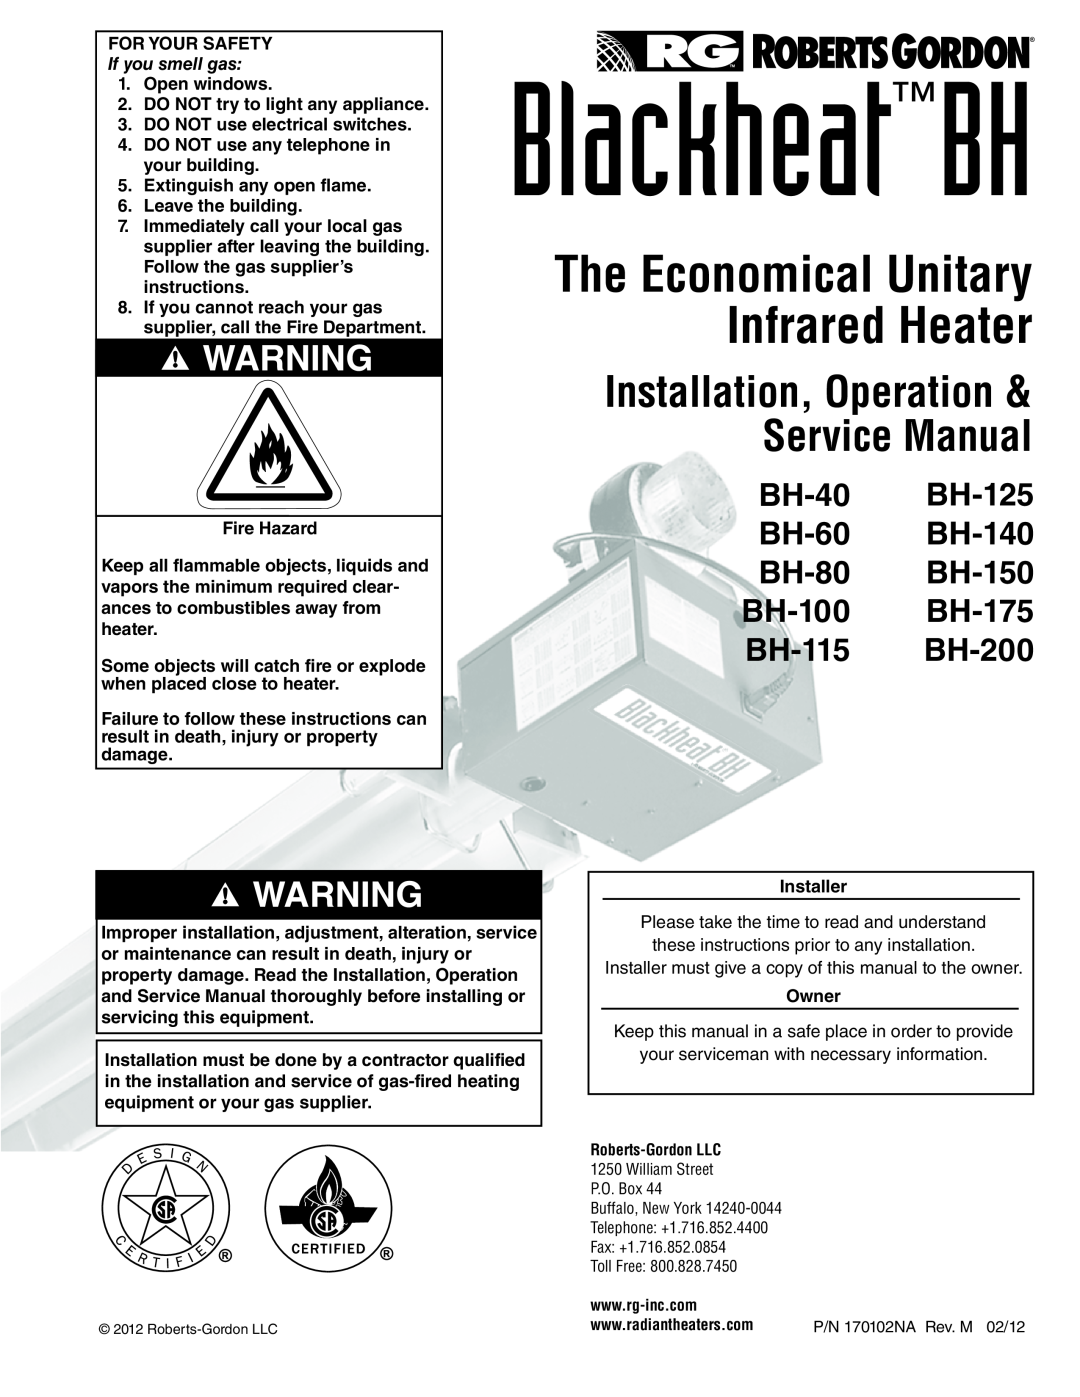 Roberts Gorden BH-40 service manual The Economical Unitary, Infrared Heater, Service Manual, Installation, Operation 